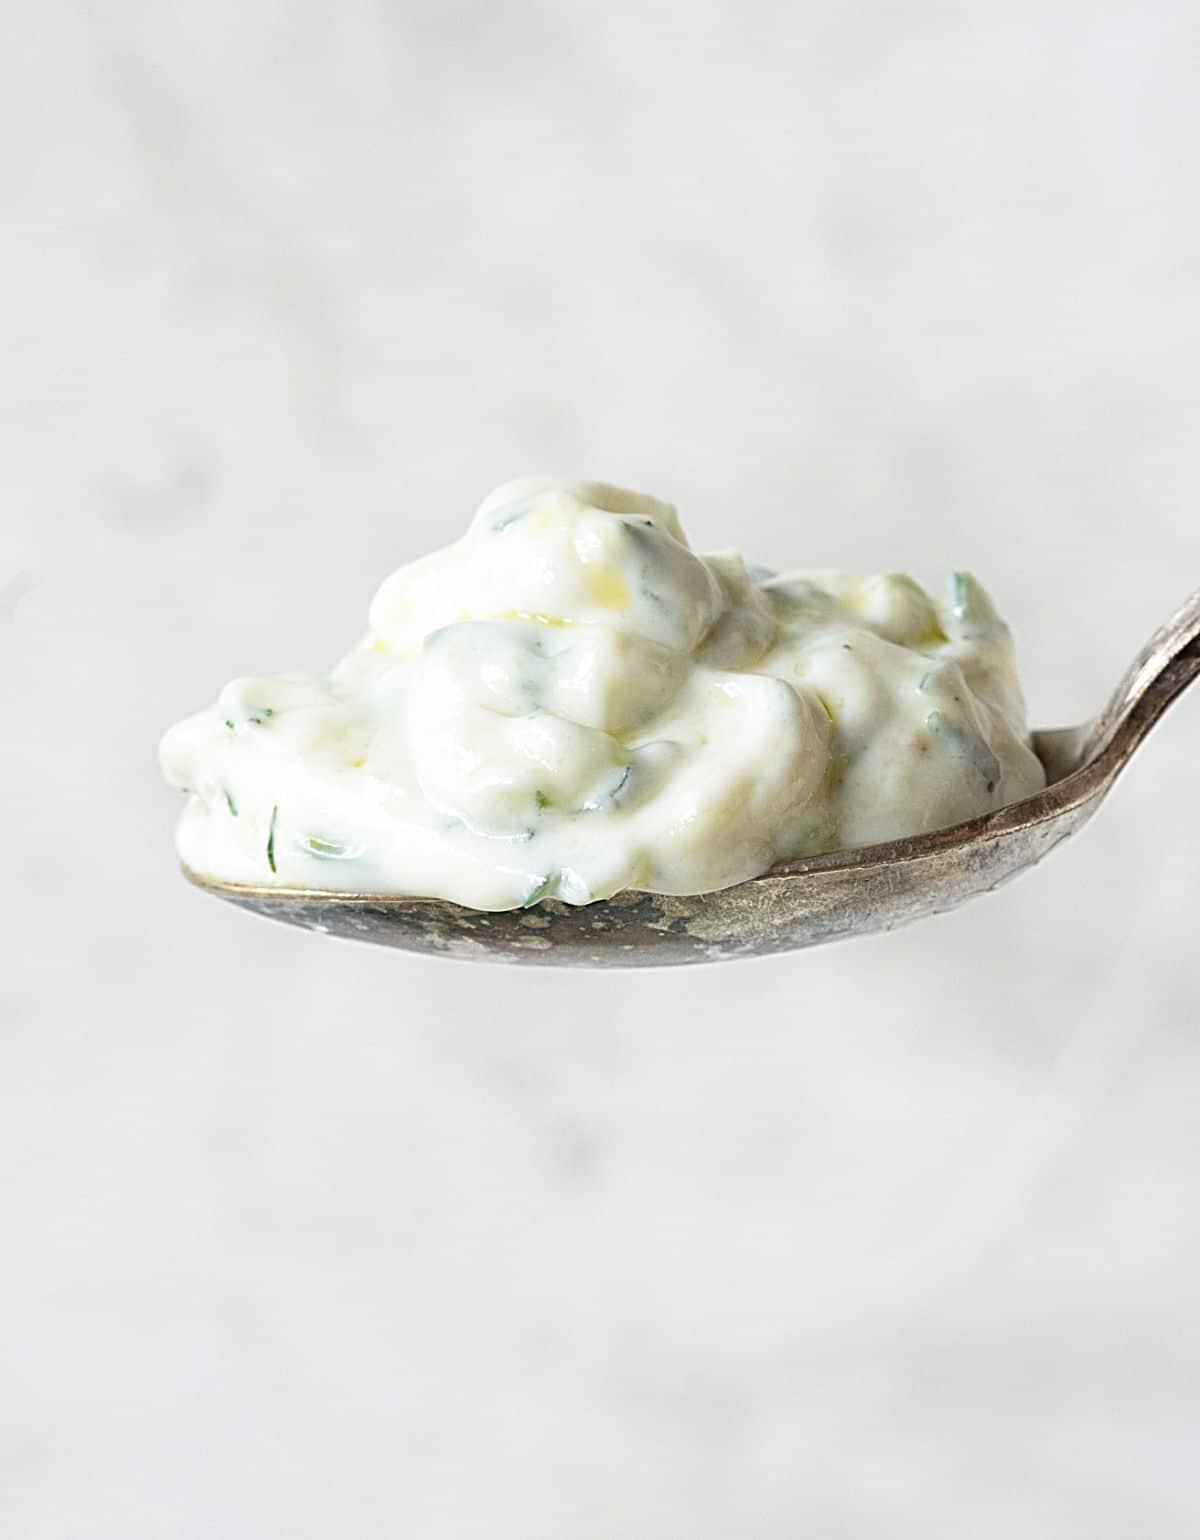 Silver spoon with cucumber yogurt sauce on a grey background. 